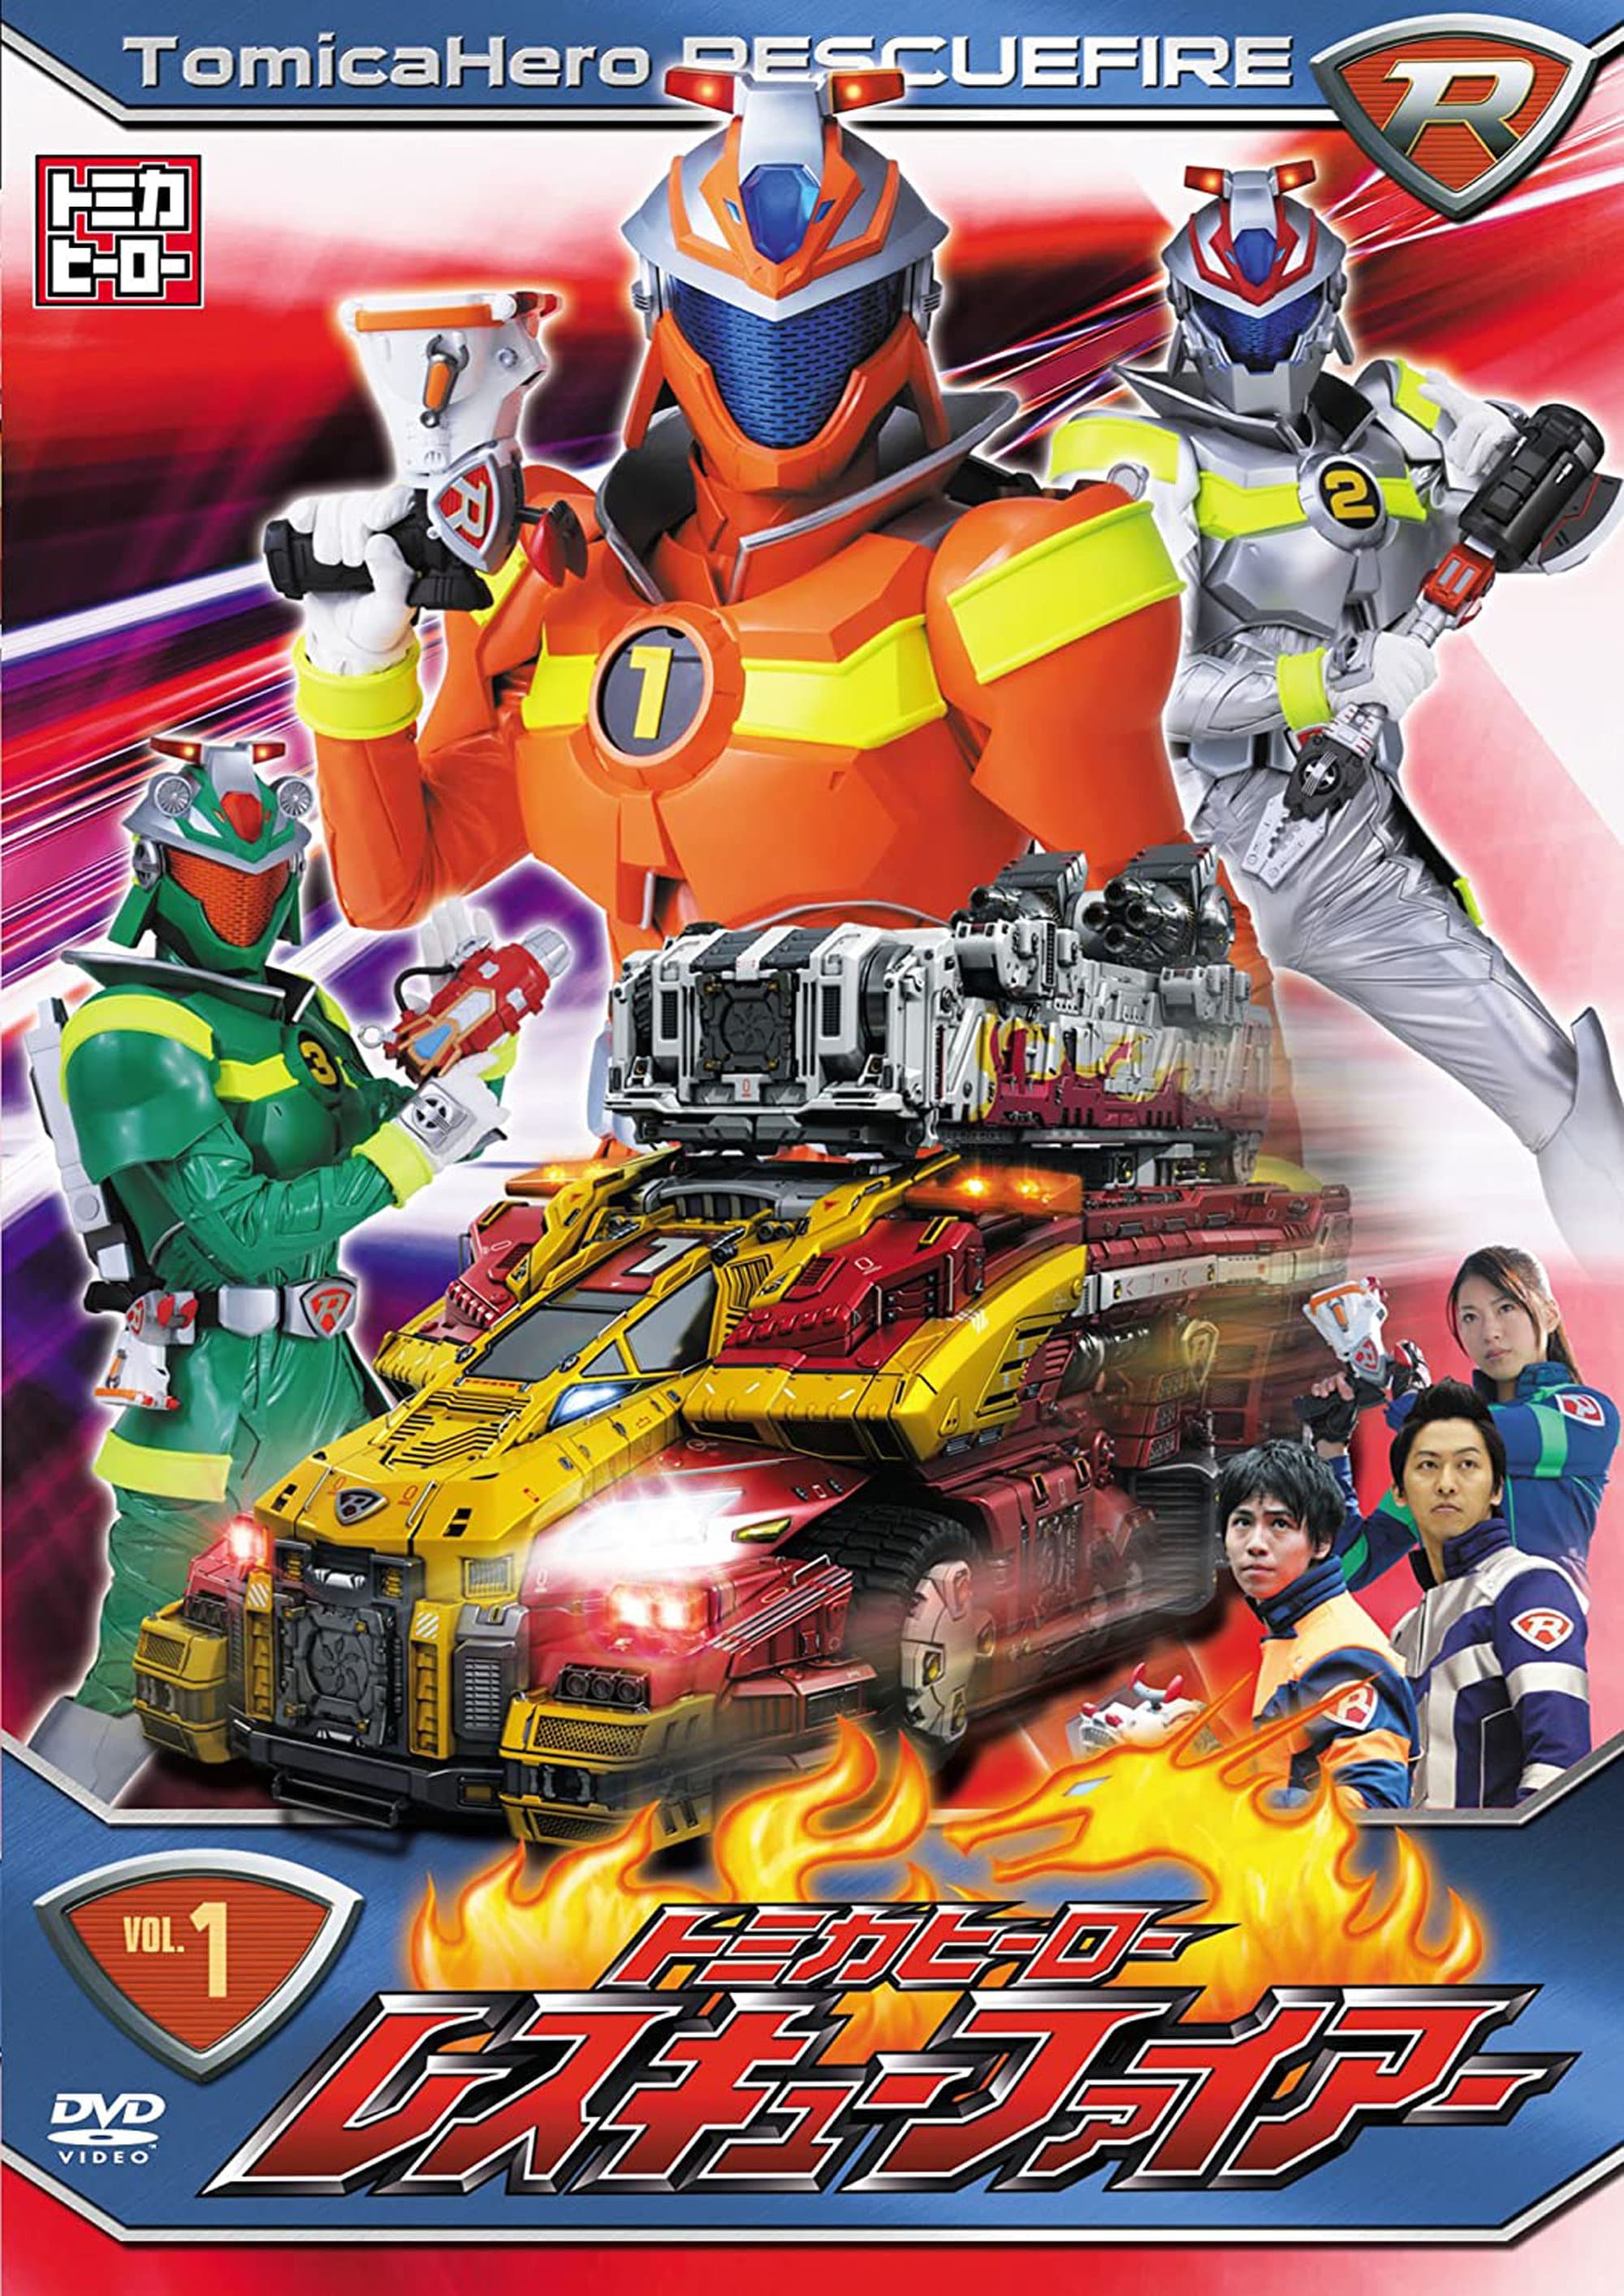 Tomica Hero: Rescue Fire 2009 トミカヒーロー レスキューファイアー Complete DVD Series ...